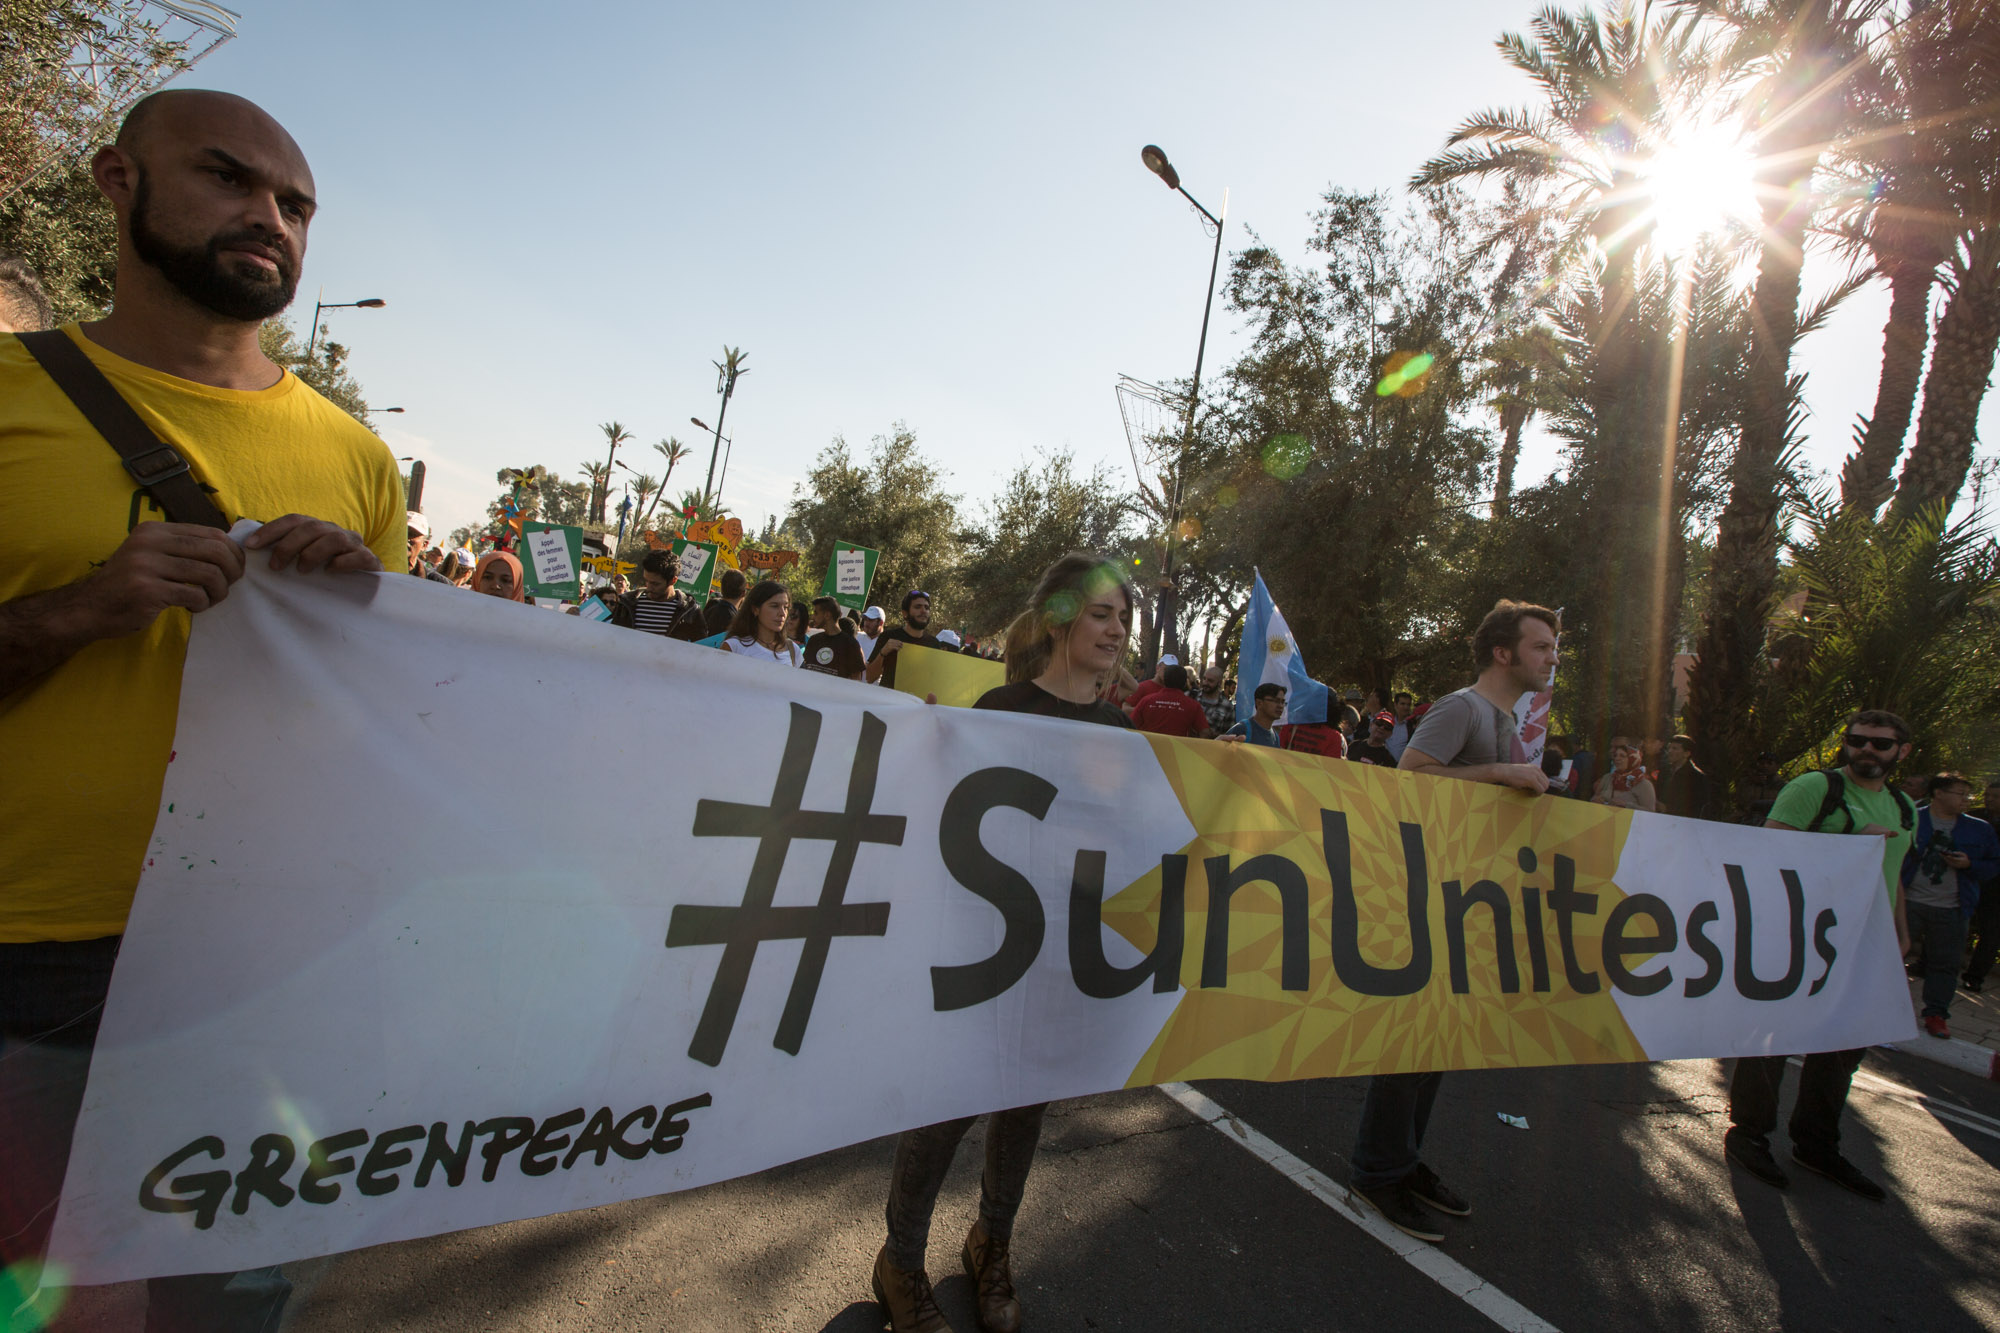 Greenpeace call for greater use of solar power in the Arab World, while participating in the Climate March, organized by the MCoalition for Climate Justice (Moroccan and regional organizations; environmental, human rights, women's associations, youth groups, unions and syndicates..) during the COP22 conference, in Marrakech, Morocco, on 13 November 2016.